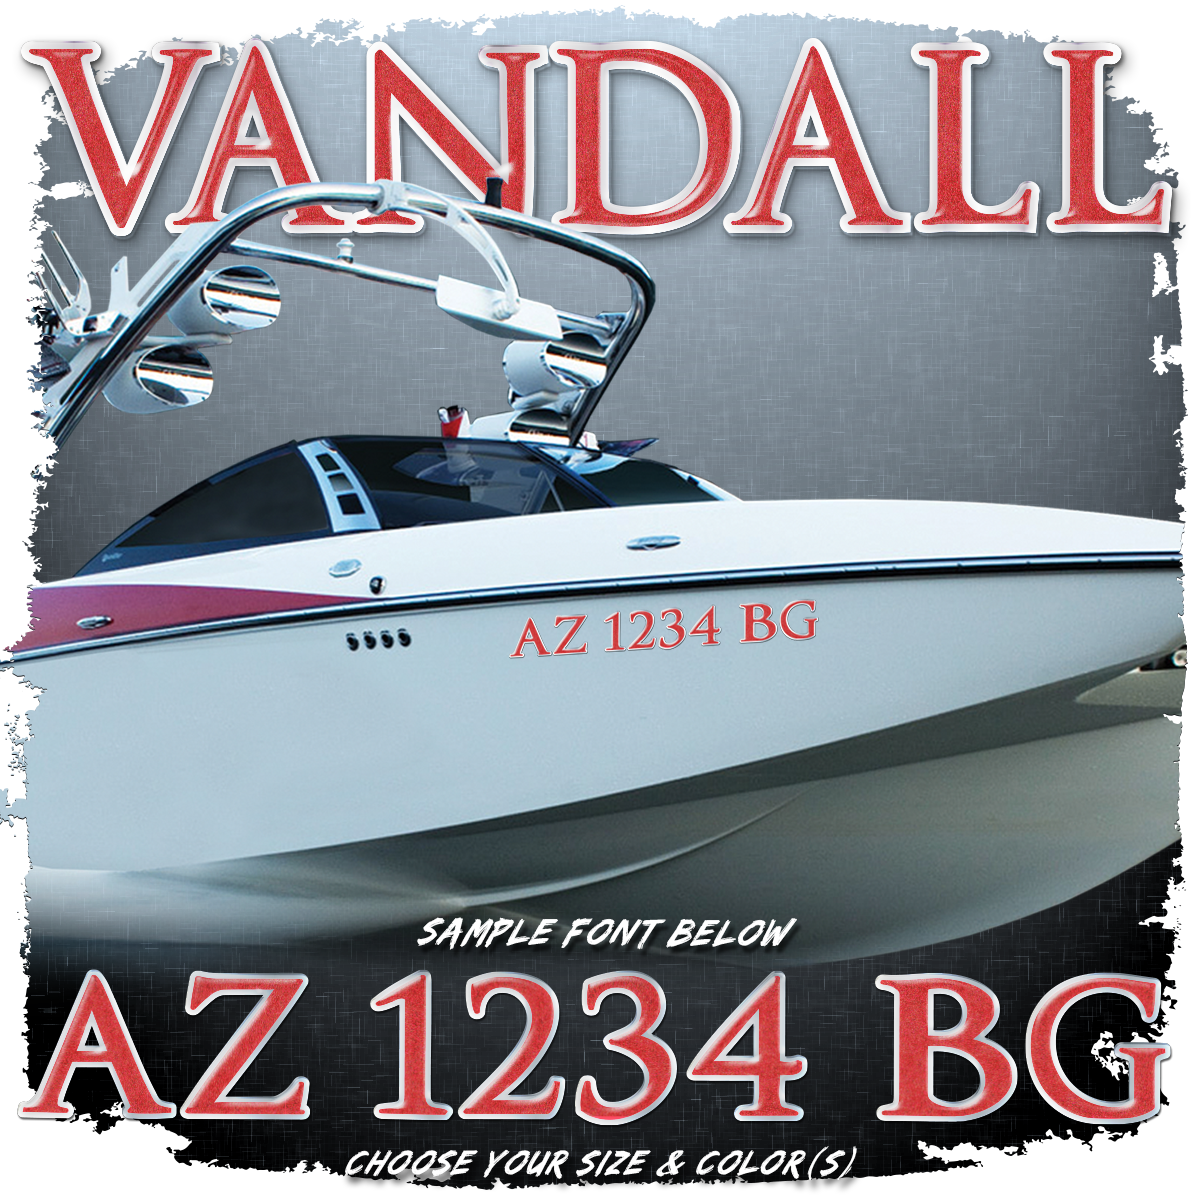 Axis Vandall Registration (2 included), Choose Your Own Colors